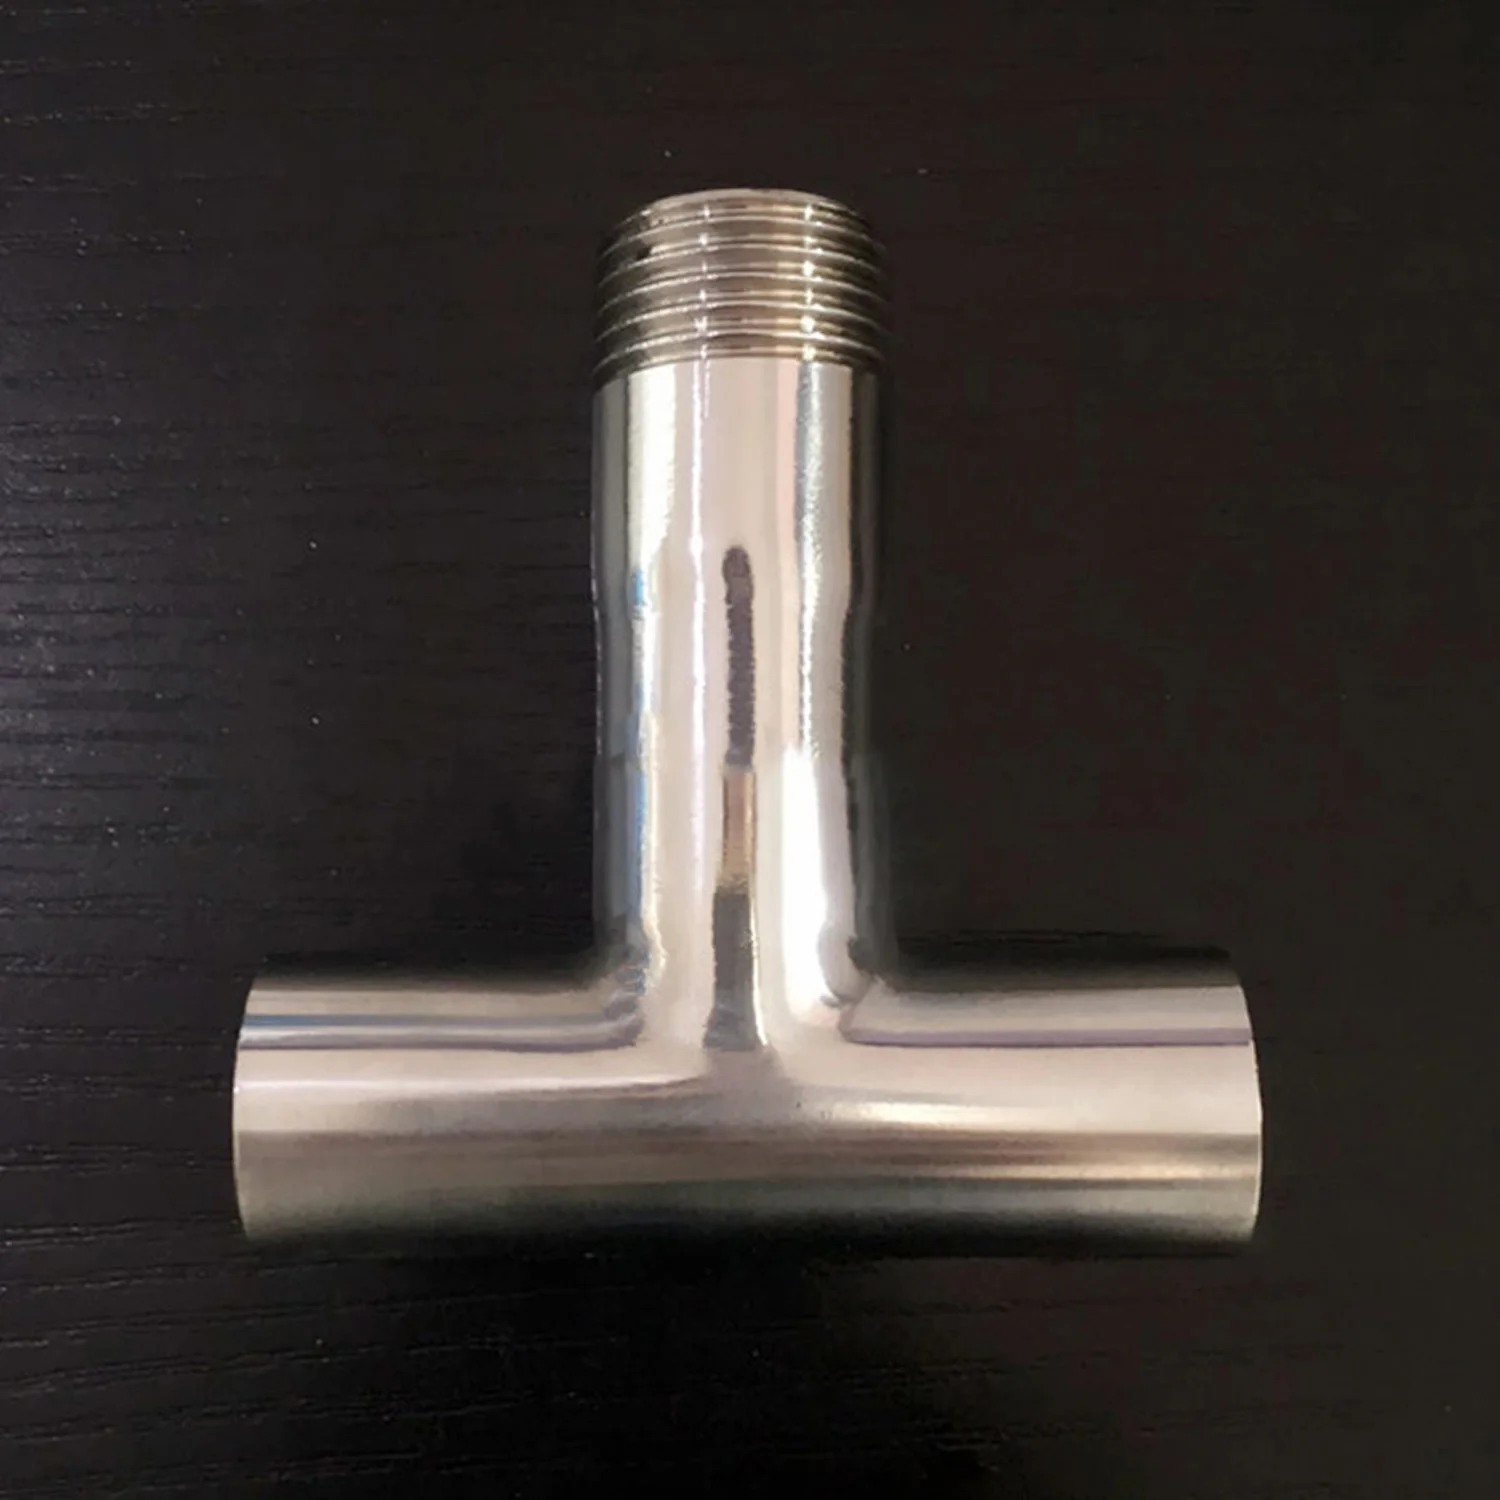 

19mm-57mm Pipe OD Butt Weld x 1/2" - 2" BSPT Male Tee 3 Way SUS 304 Stainless Sanitary Fitting Homebrew Beer Wine